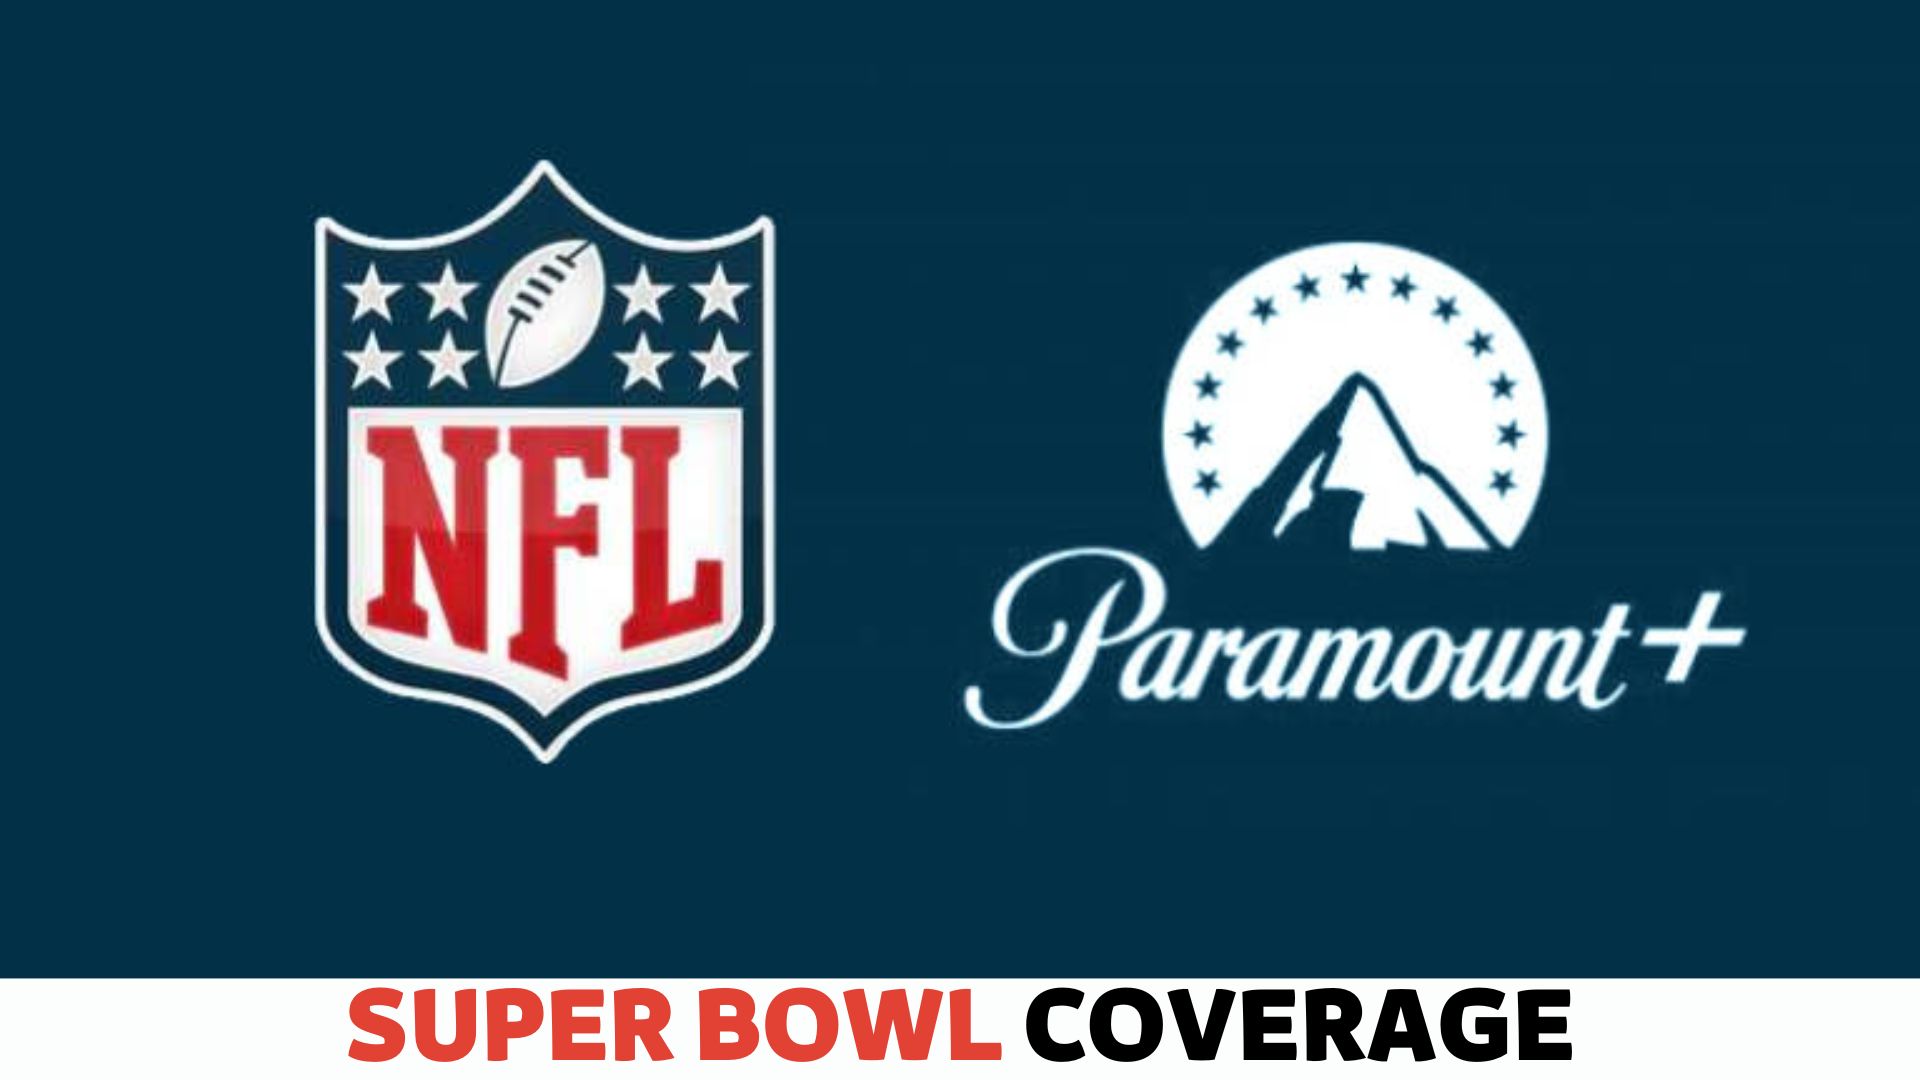 NFL Games on Paramount+: How to Watch, Price, and Plans